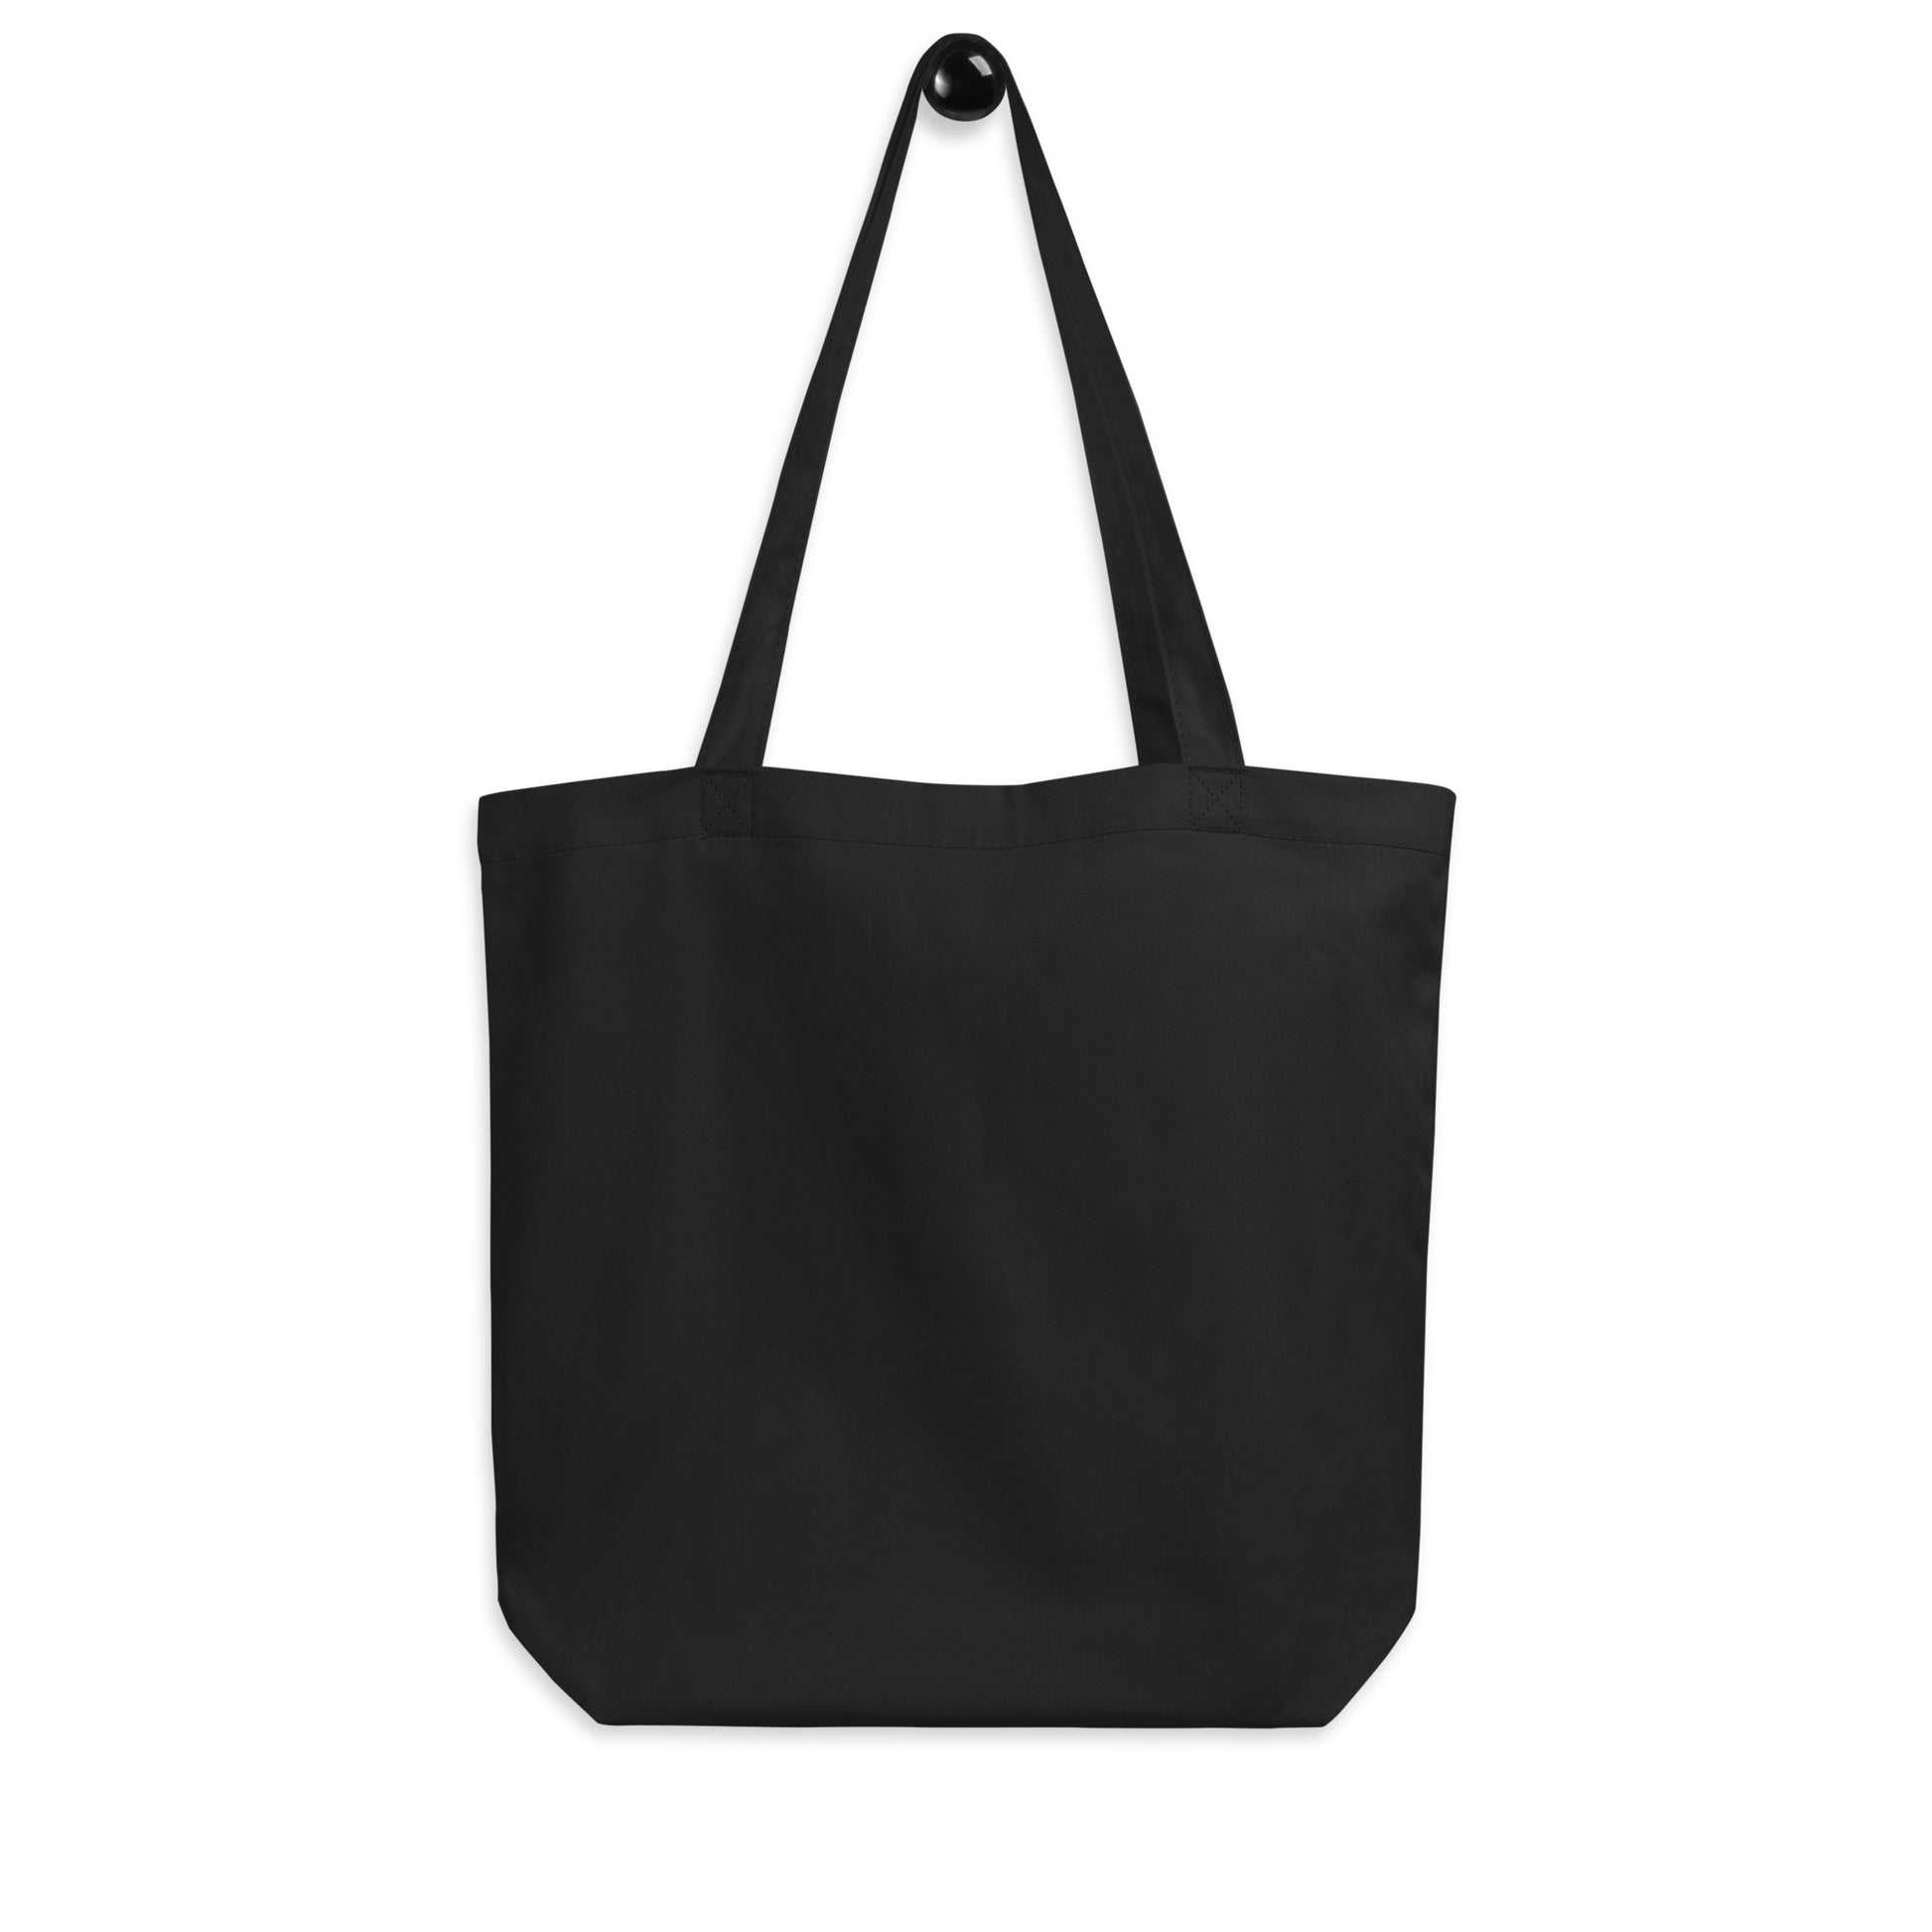 Unique Travel Gift Organic Tote - White Oval • YYZ Toronto • YHM Designs - Image 05